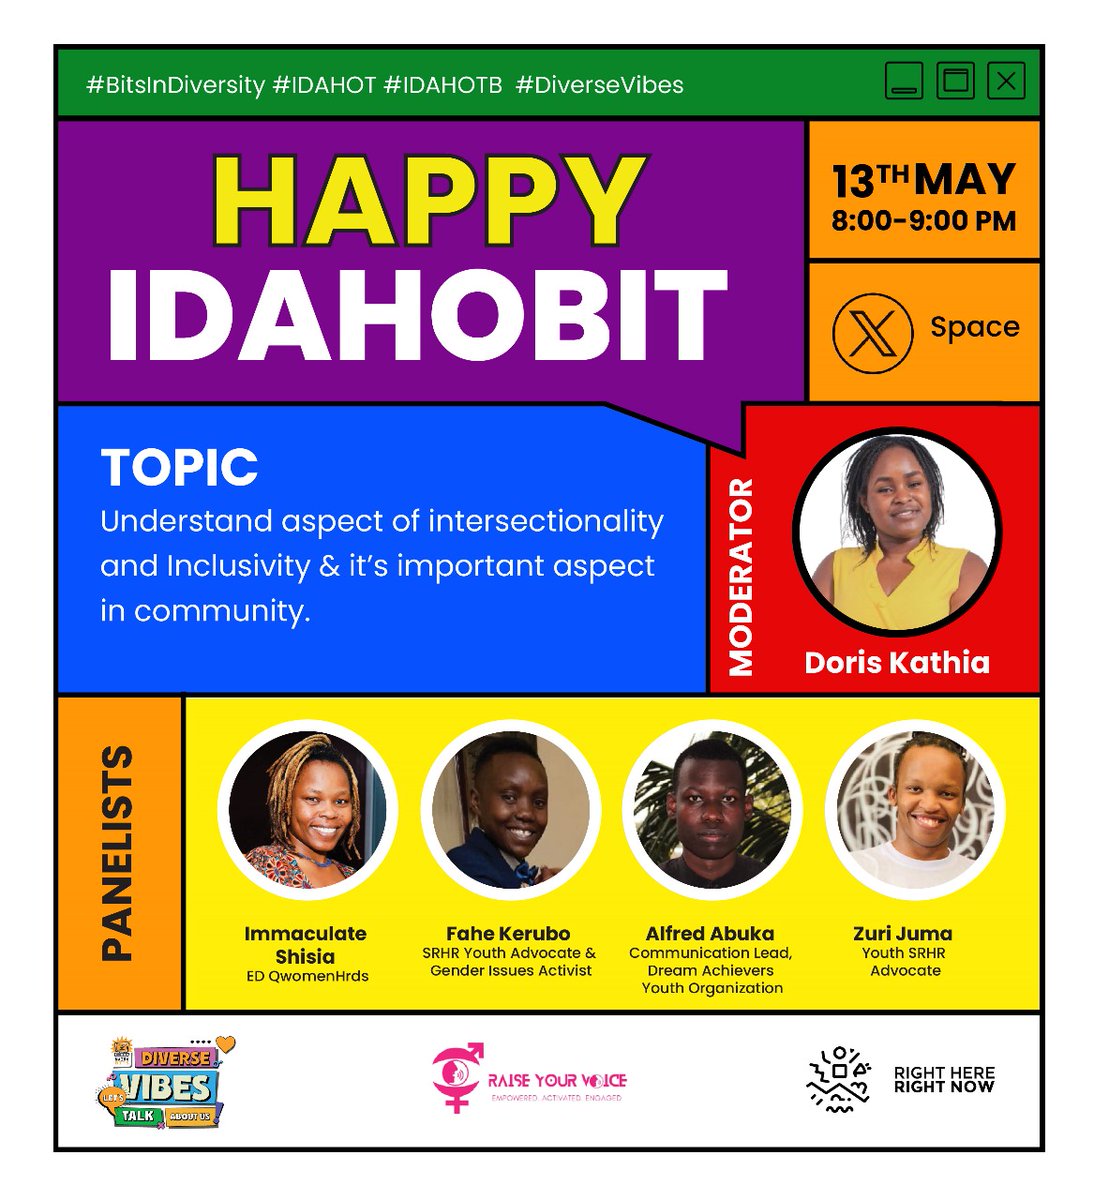 Got no plans later? Join this amazing panel Scarlet, Fahe, Zuri and Alfred as they explore intersectionality and inclusivity in the community. #BitsInDiversity #IDAHOT #IDAHOTB #DiverseVibes @Nairobits @lovematterskenya @kenyasrhr @rhrnkenya @QwomenHRDs @DreamAchieversk